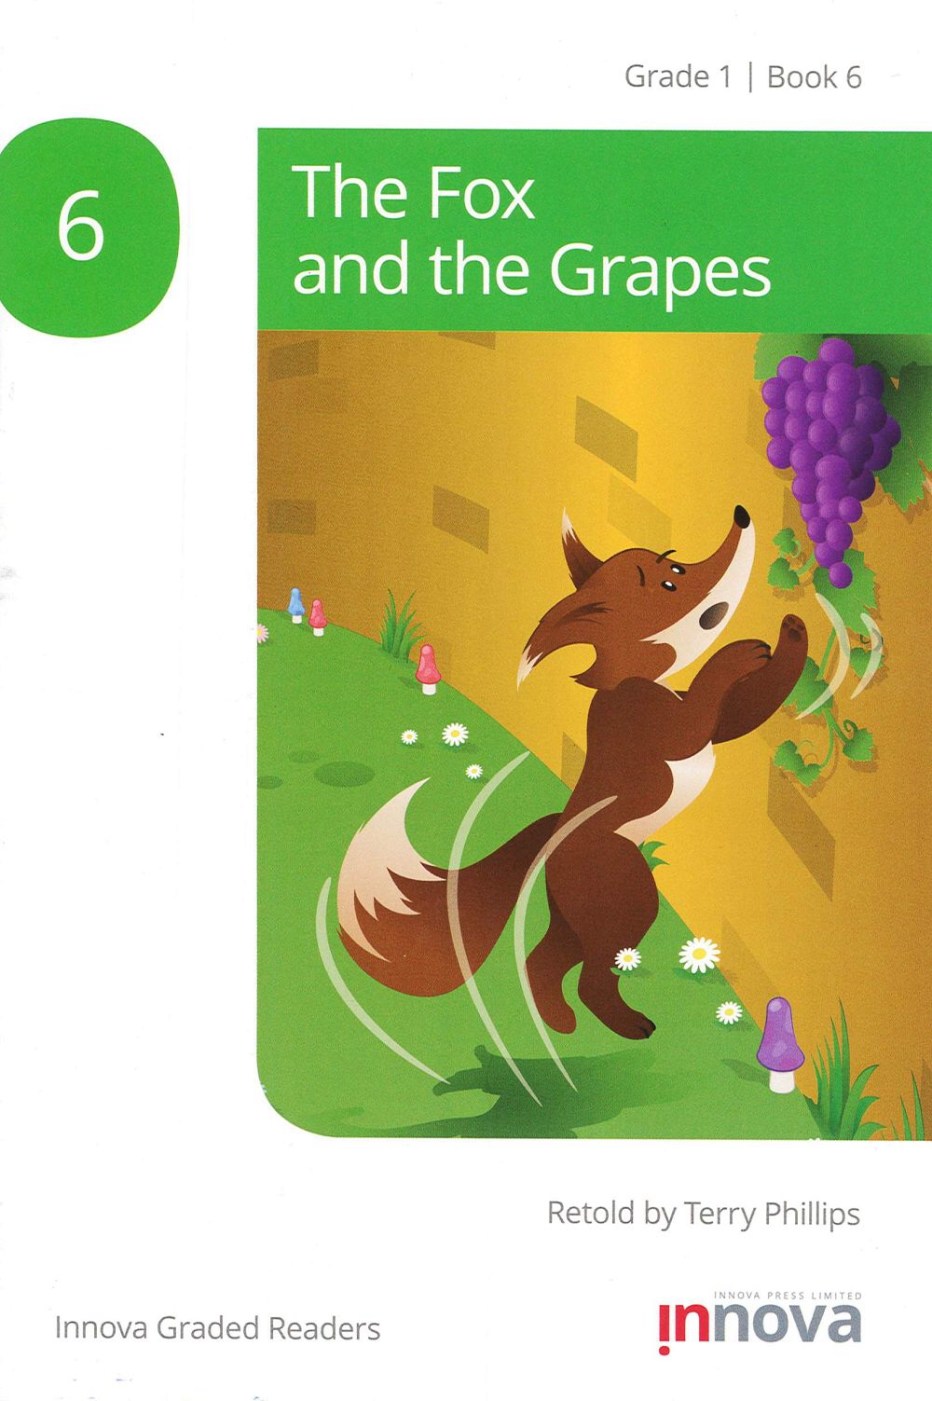 Innova Graded Readers Grade 1 (Book 6): The Fox and the Grapes